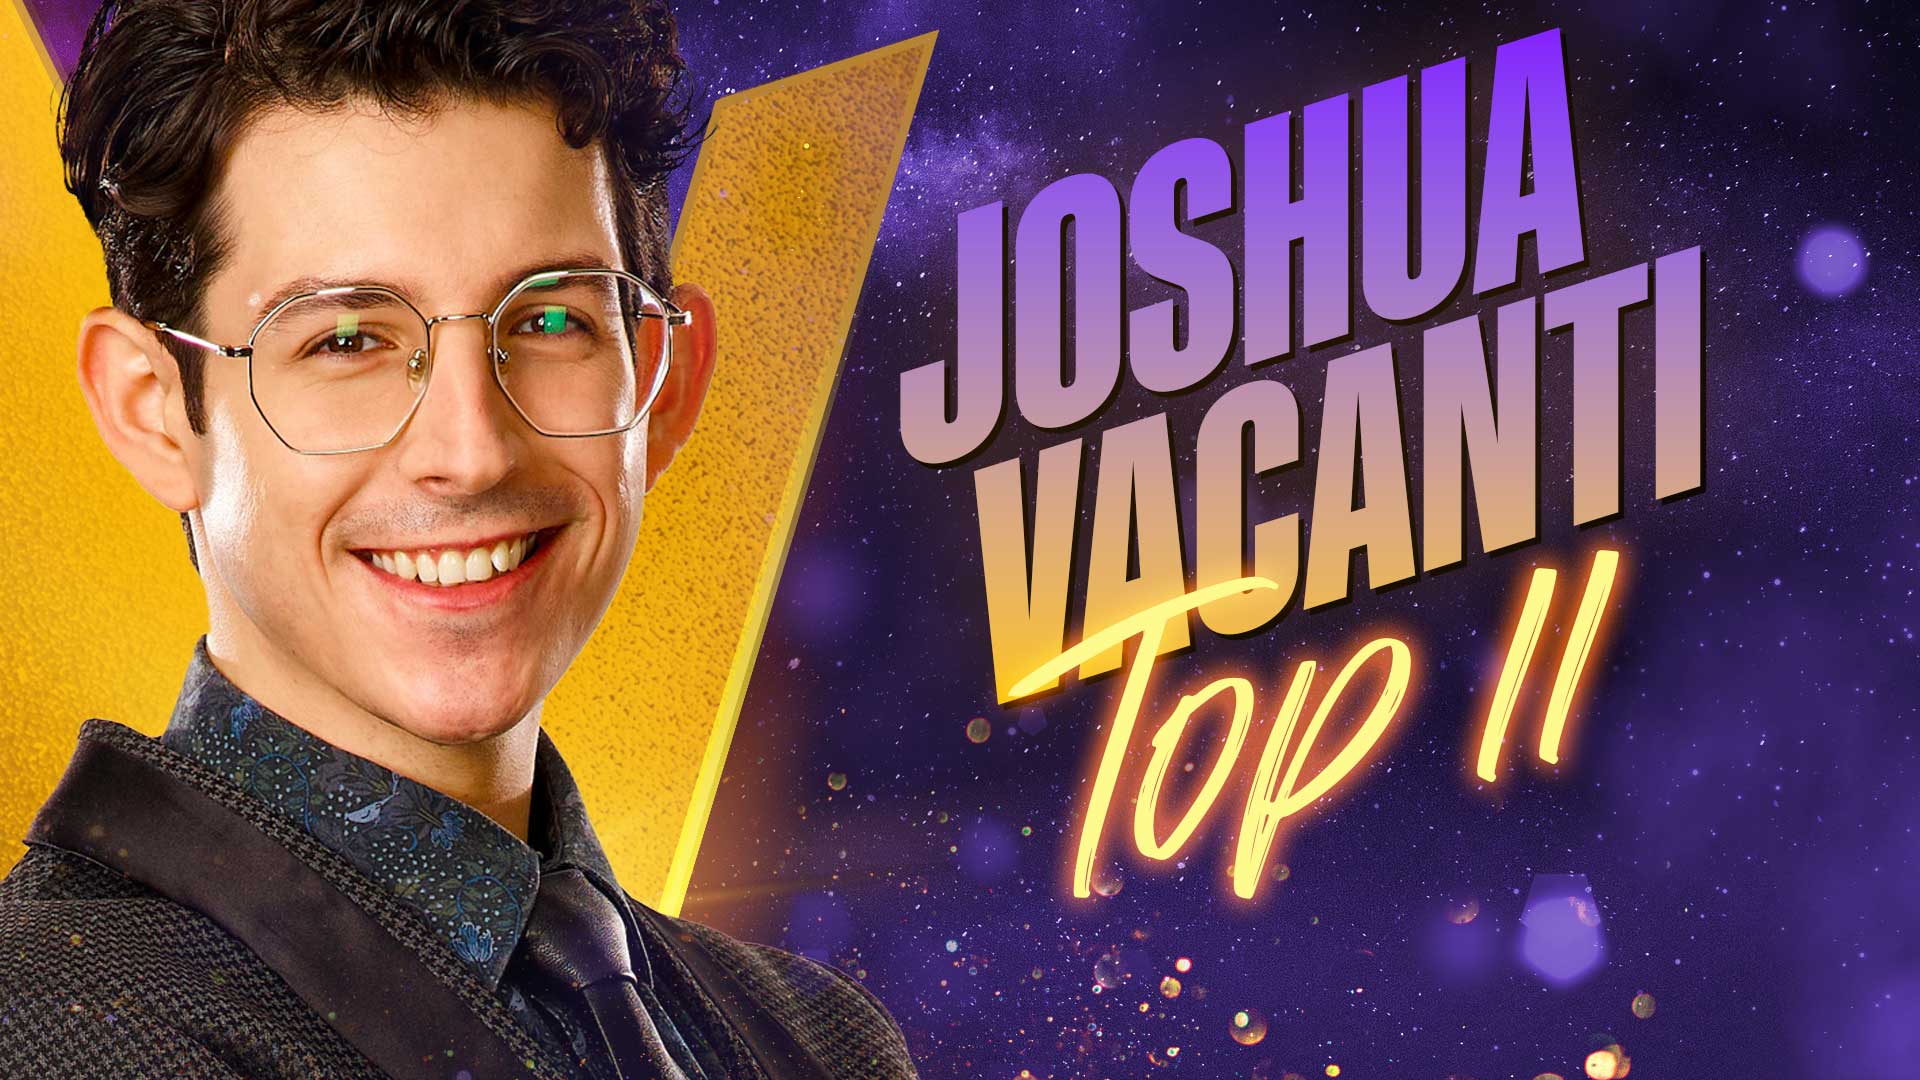 Watch The Voice Highlight Joshua Vacanti Performs Queen's "The Show